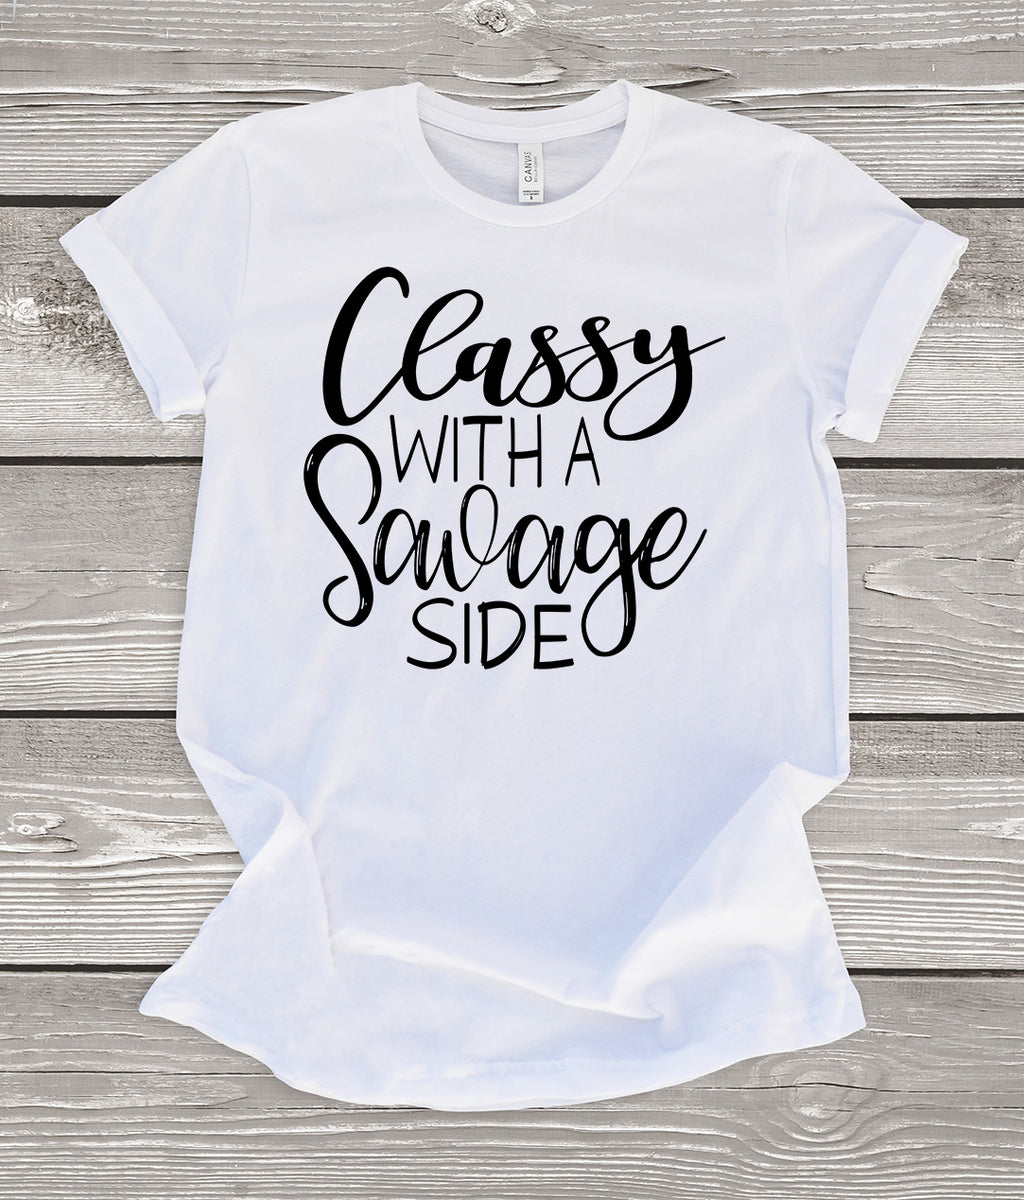 Classy With a Savage Side T-Shirt